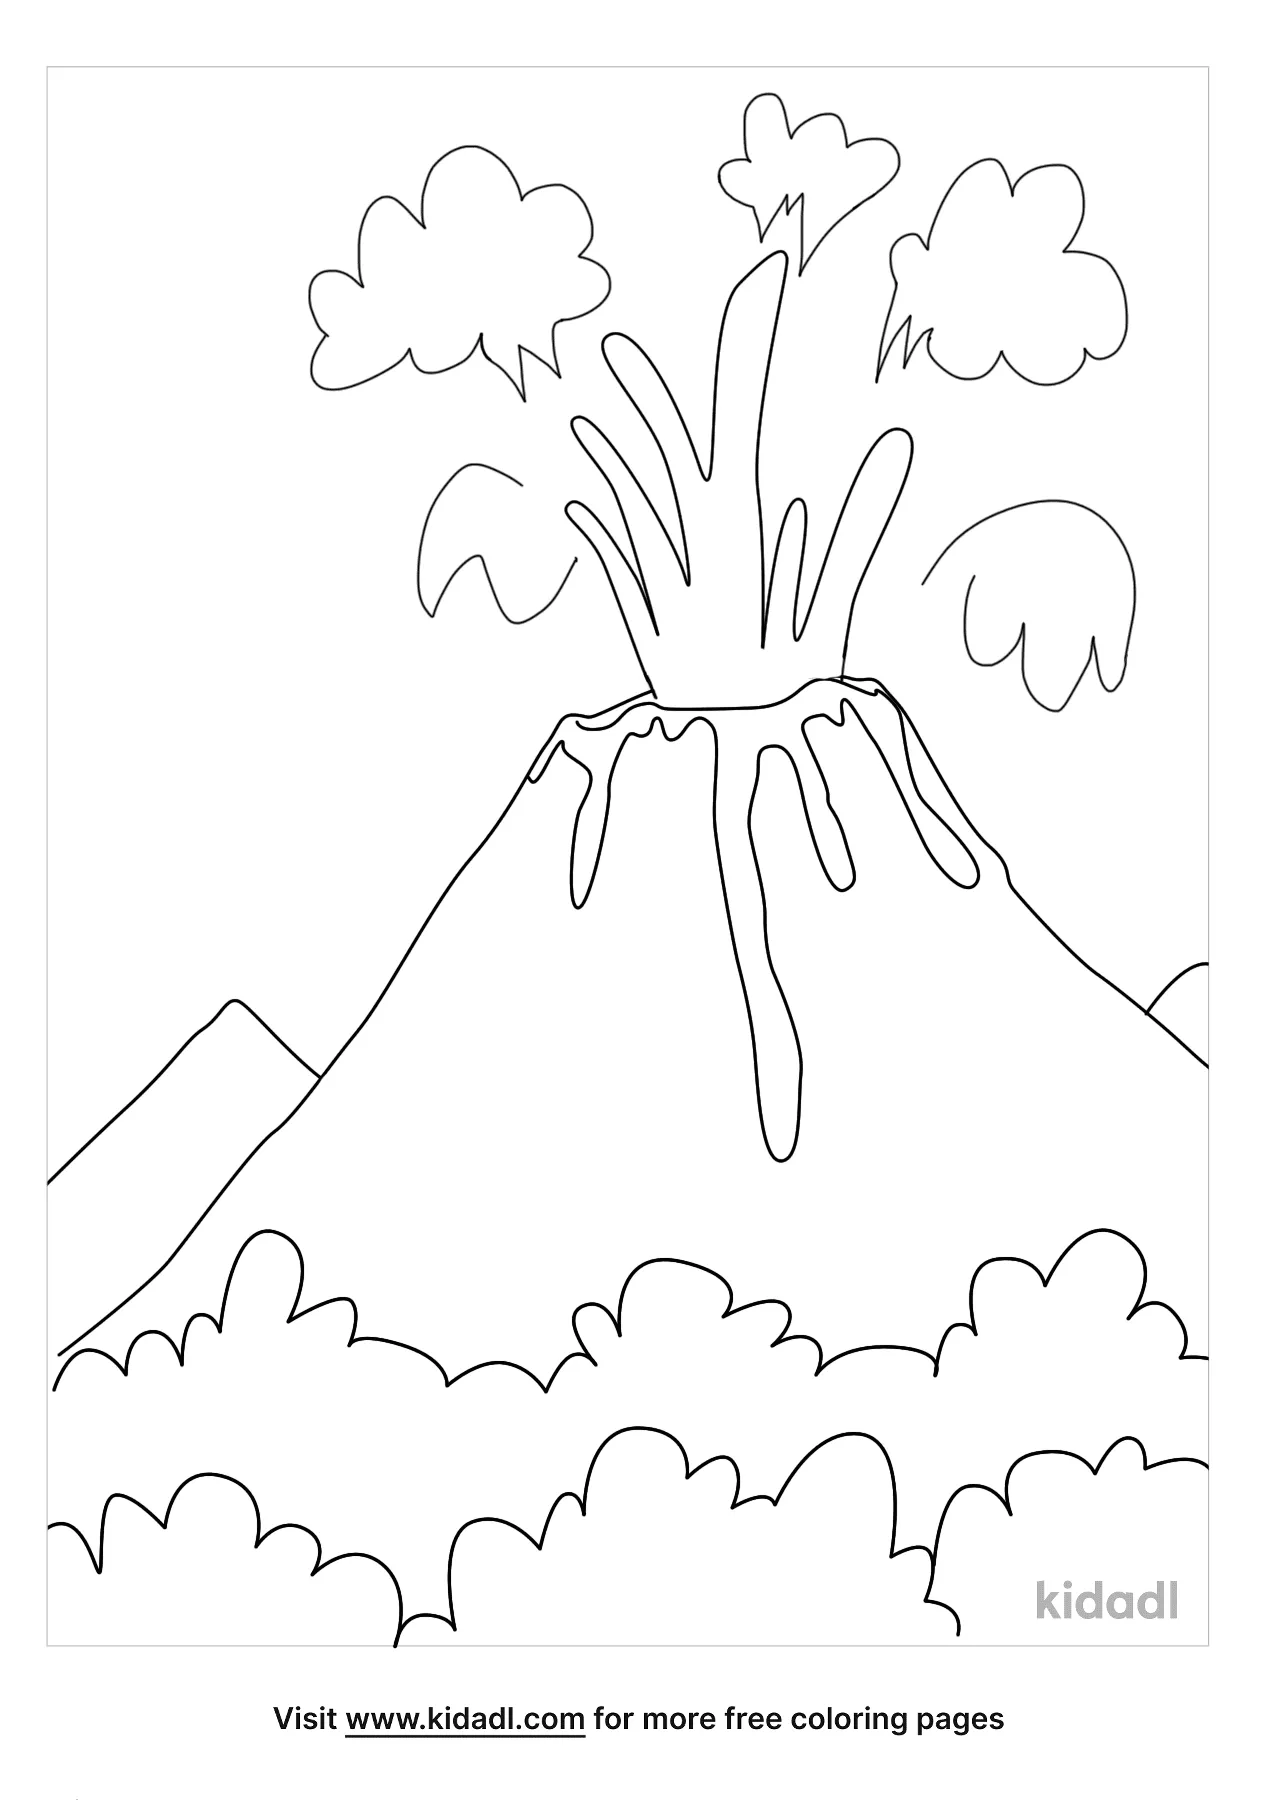 volcano coloring pages free nature coloring pages kidadl